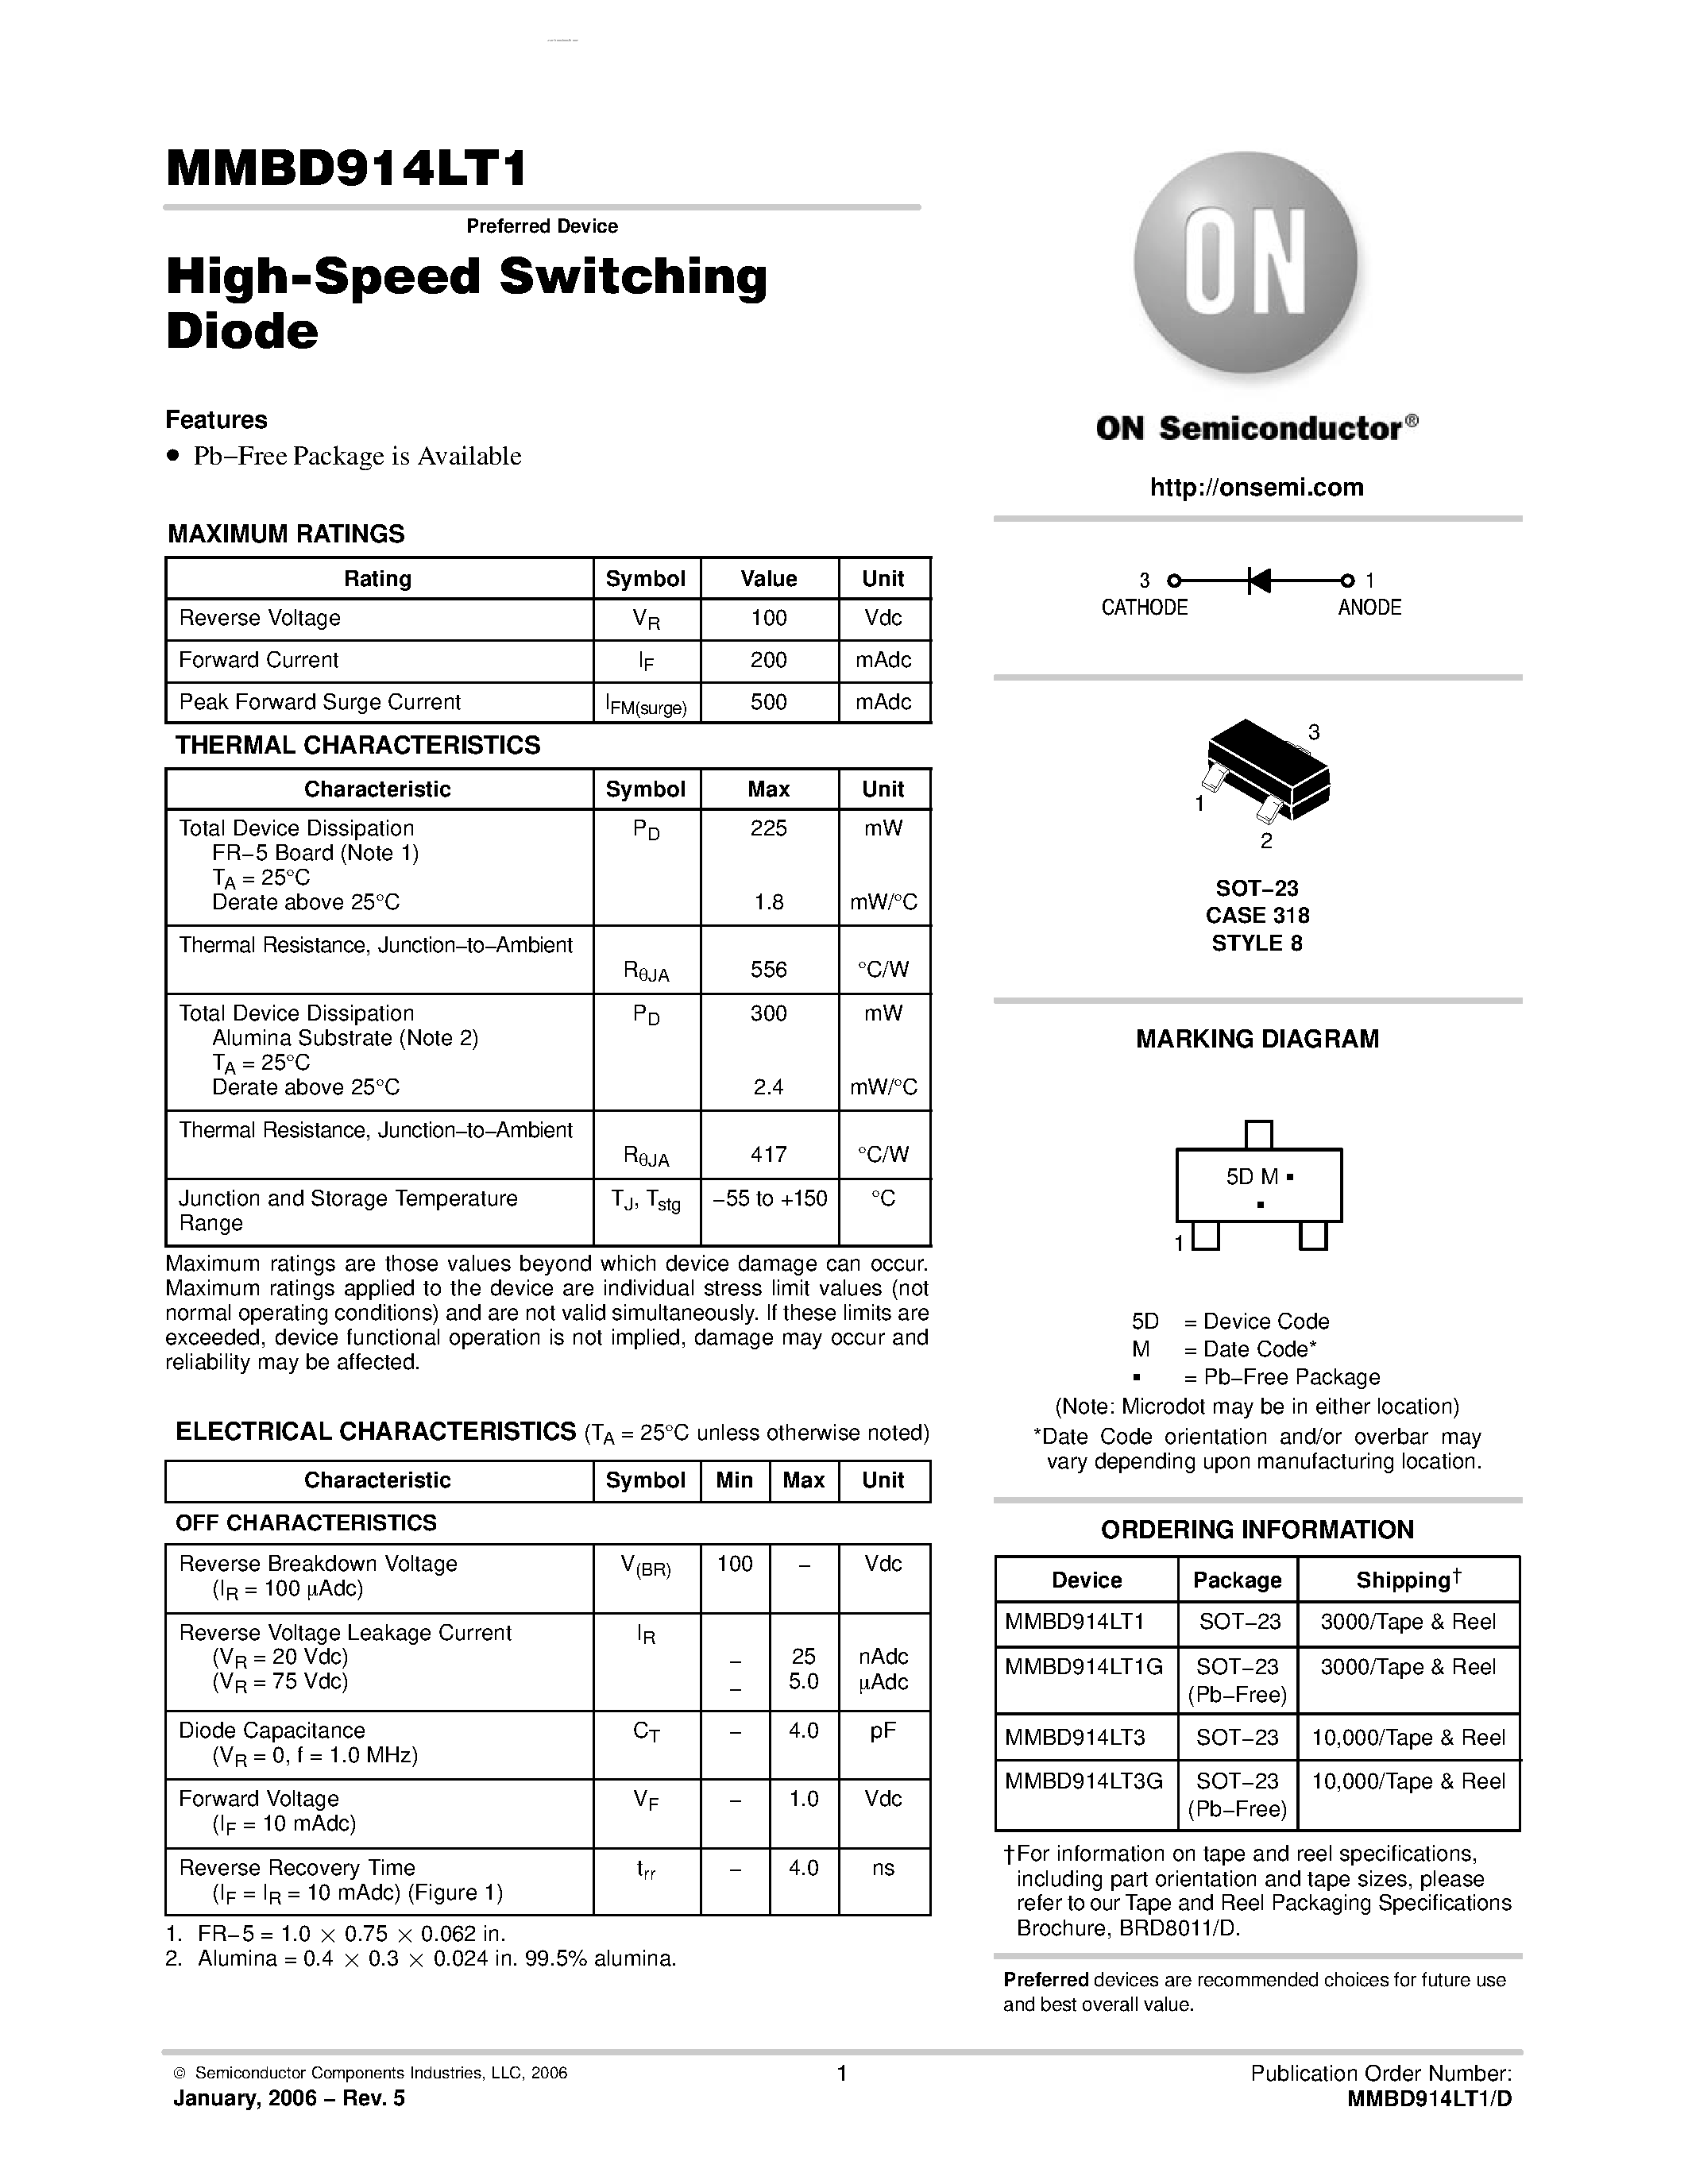 Даташит MMBD914LT1 - High-Speed Switching Diode страница 1